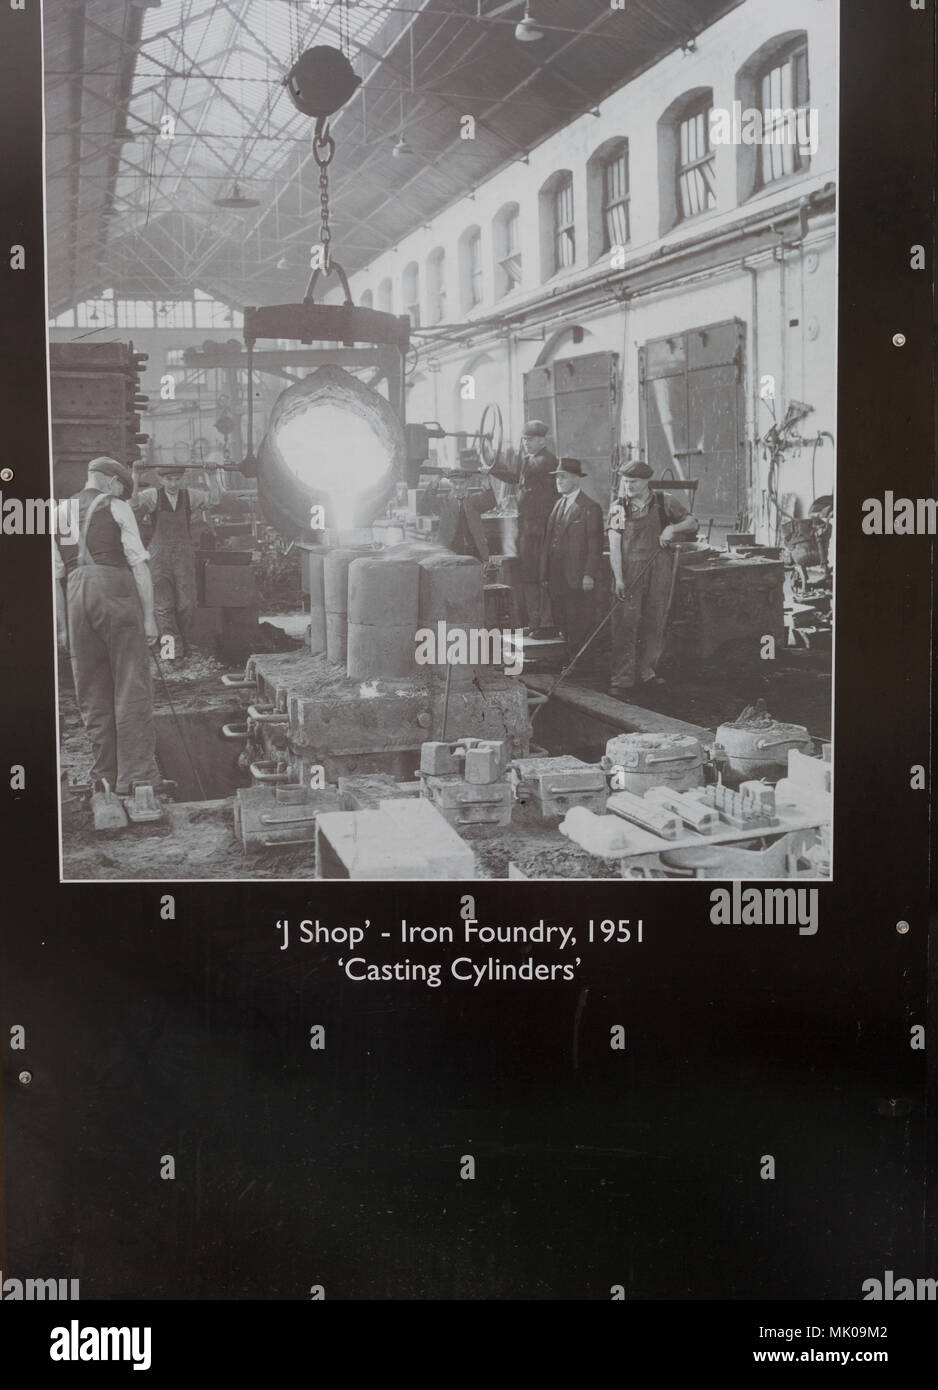 Public display of old historic images about the GWR works, Swindon, Wiltshire, England, UK - J shop iron foundry 1951 casting cylinders Stock Photo